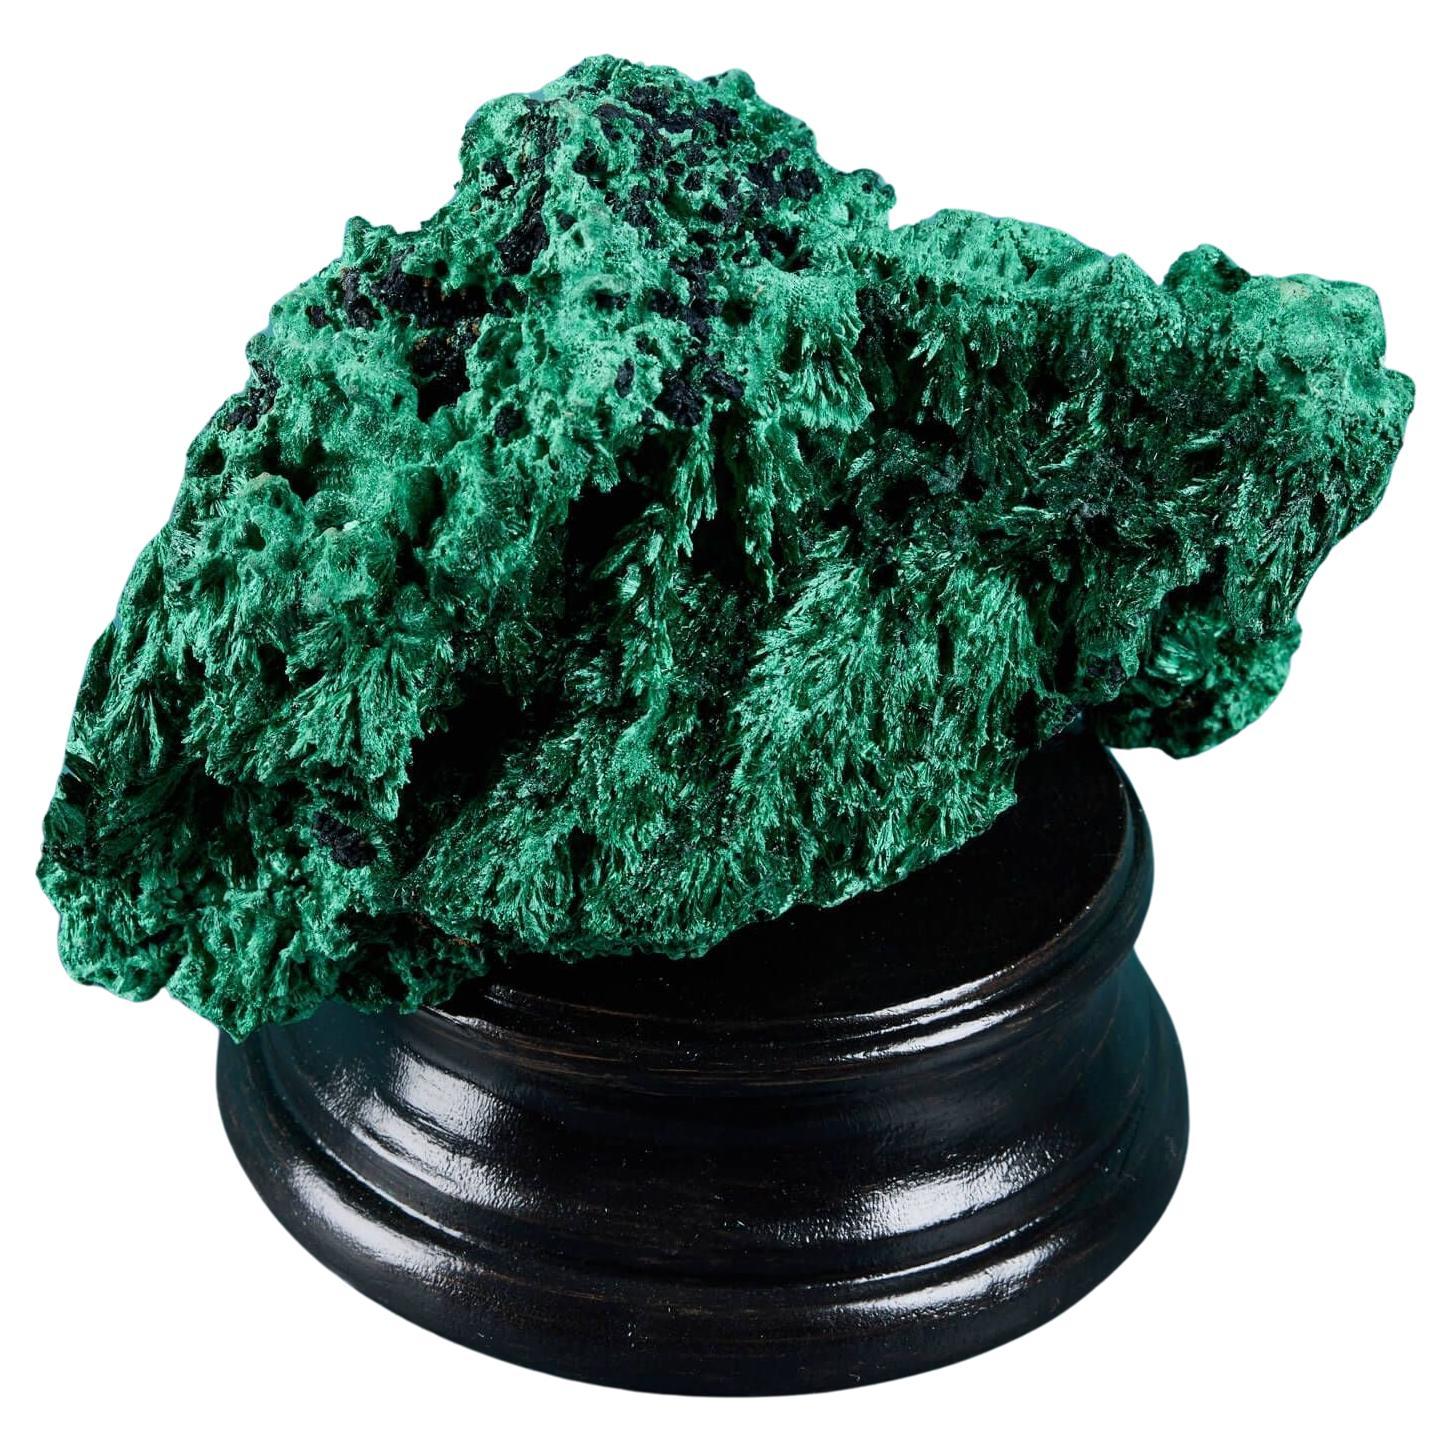 Large Natural Silky or Fibrous Malachite Specimen For Sale